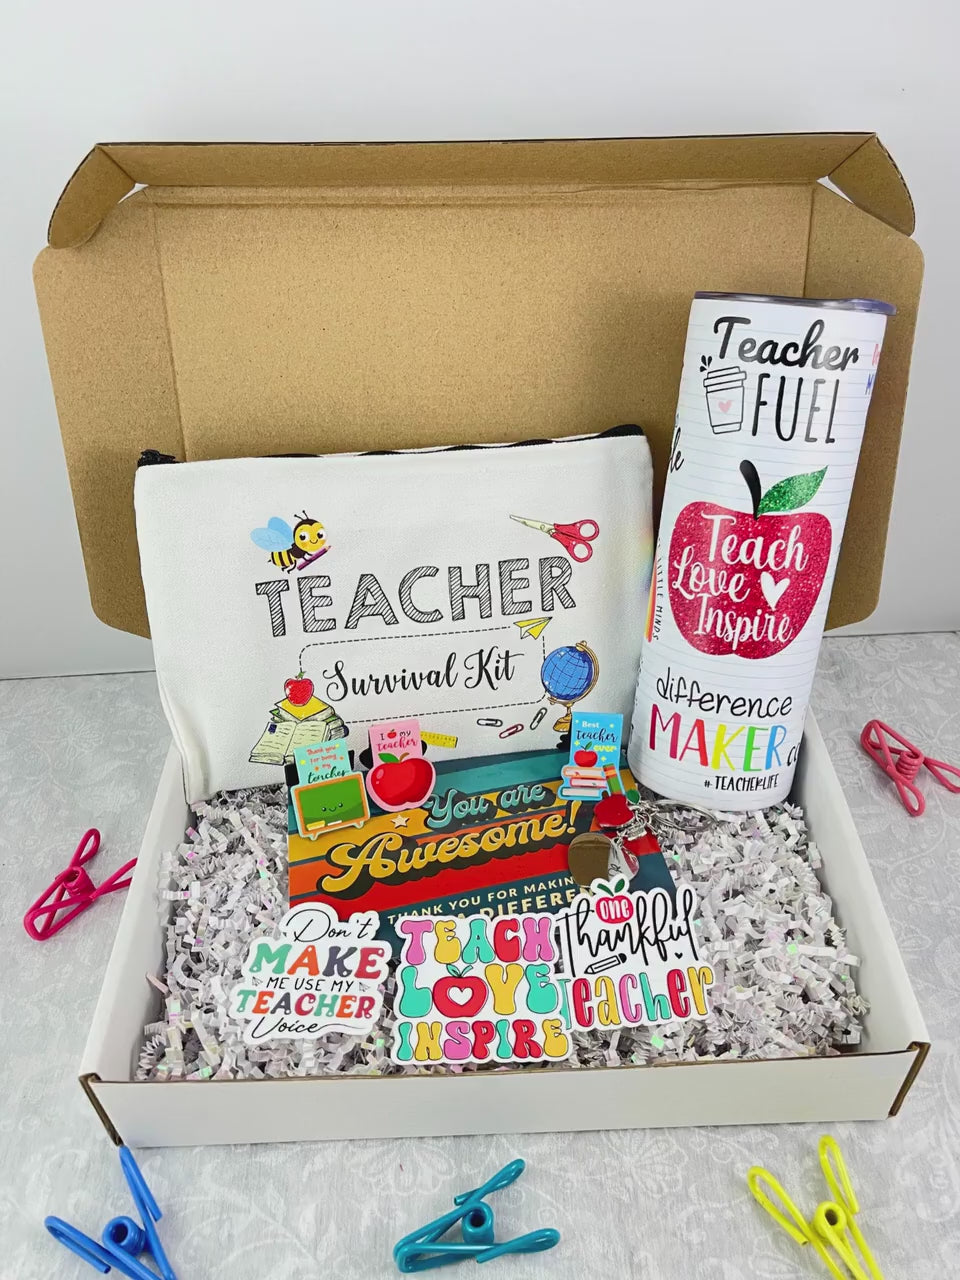 YWHL Teacher Appreciation Gifts for Women Man - Thank You Gifts for Teachers  from Student - Best Teacher Gifts Keepsake Paperweight - Back to School Gift  Teacher's Day Gifts for Dance, Art